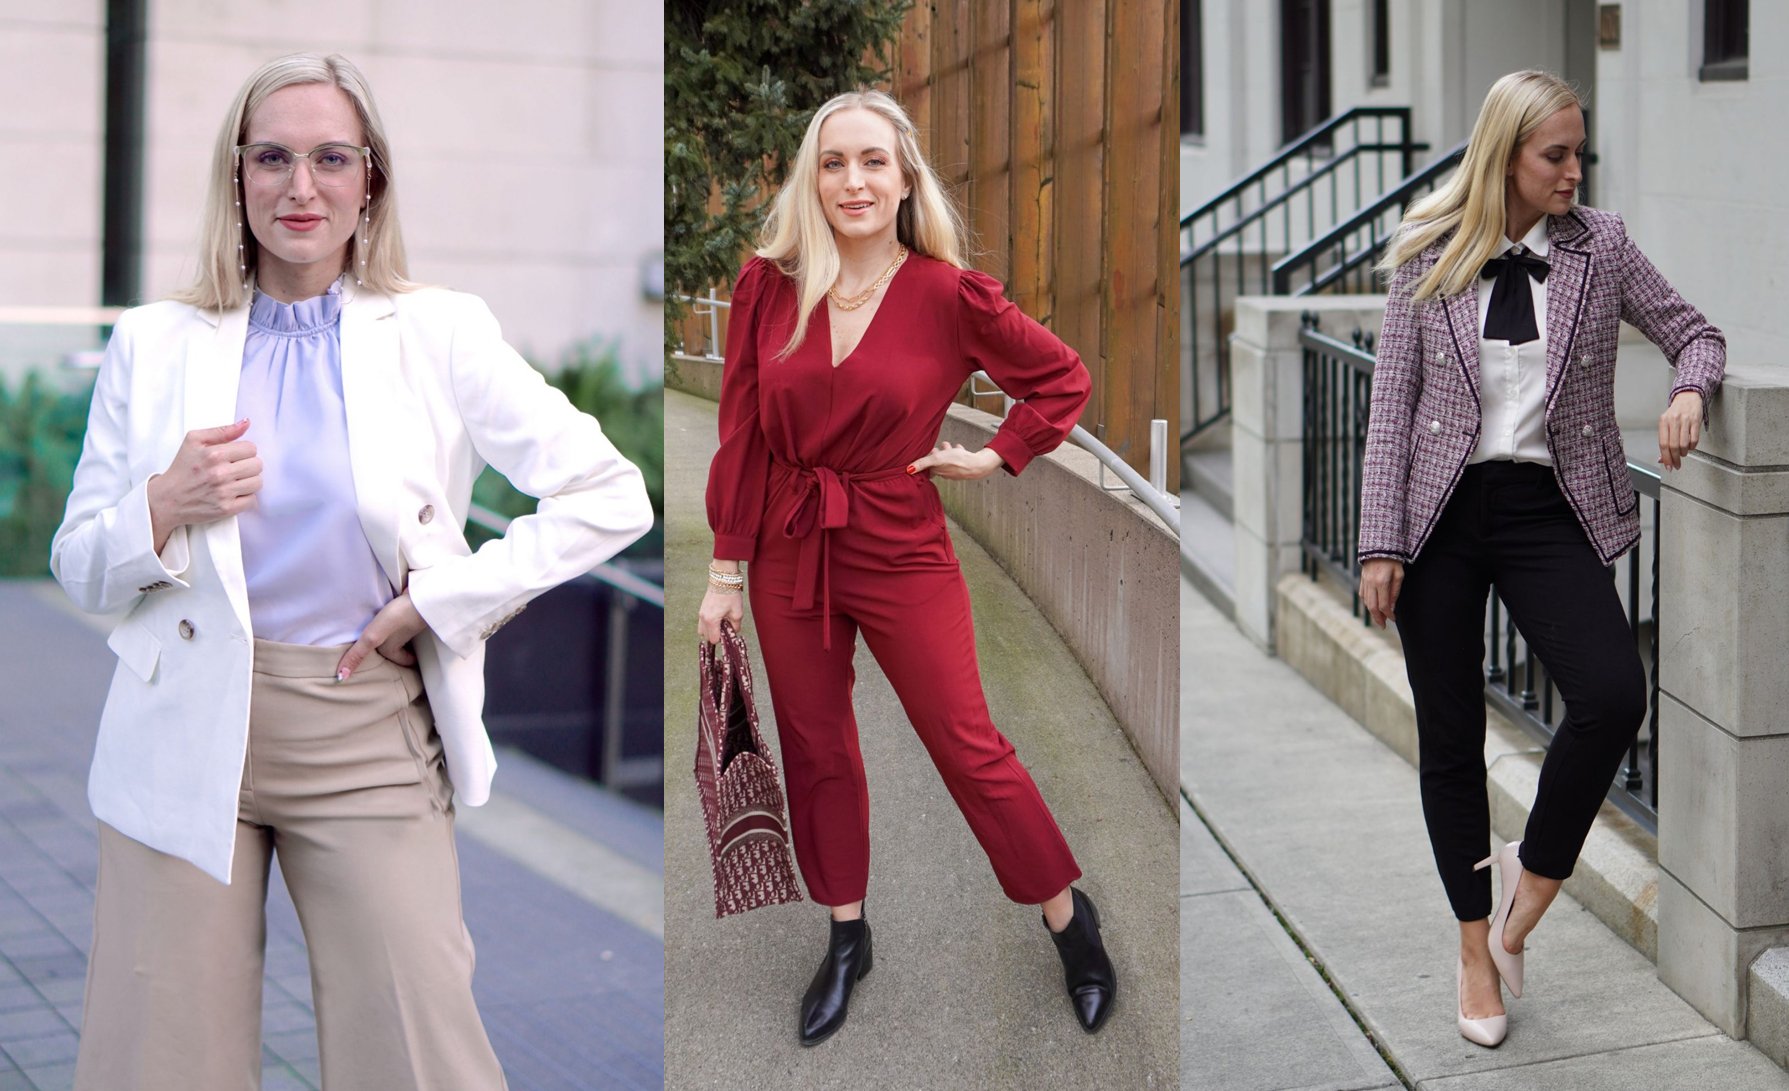 Top 50 Bloggers to Follow for Office Outfits Inspiration - The Pearl Source